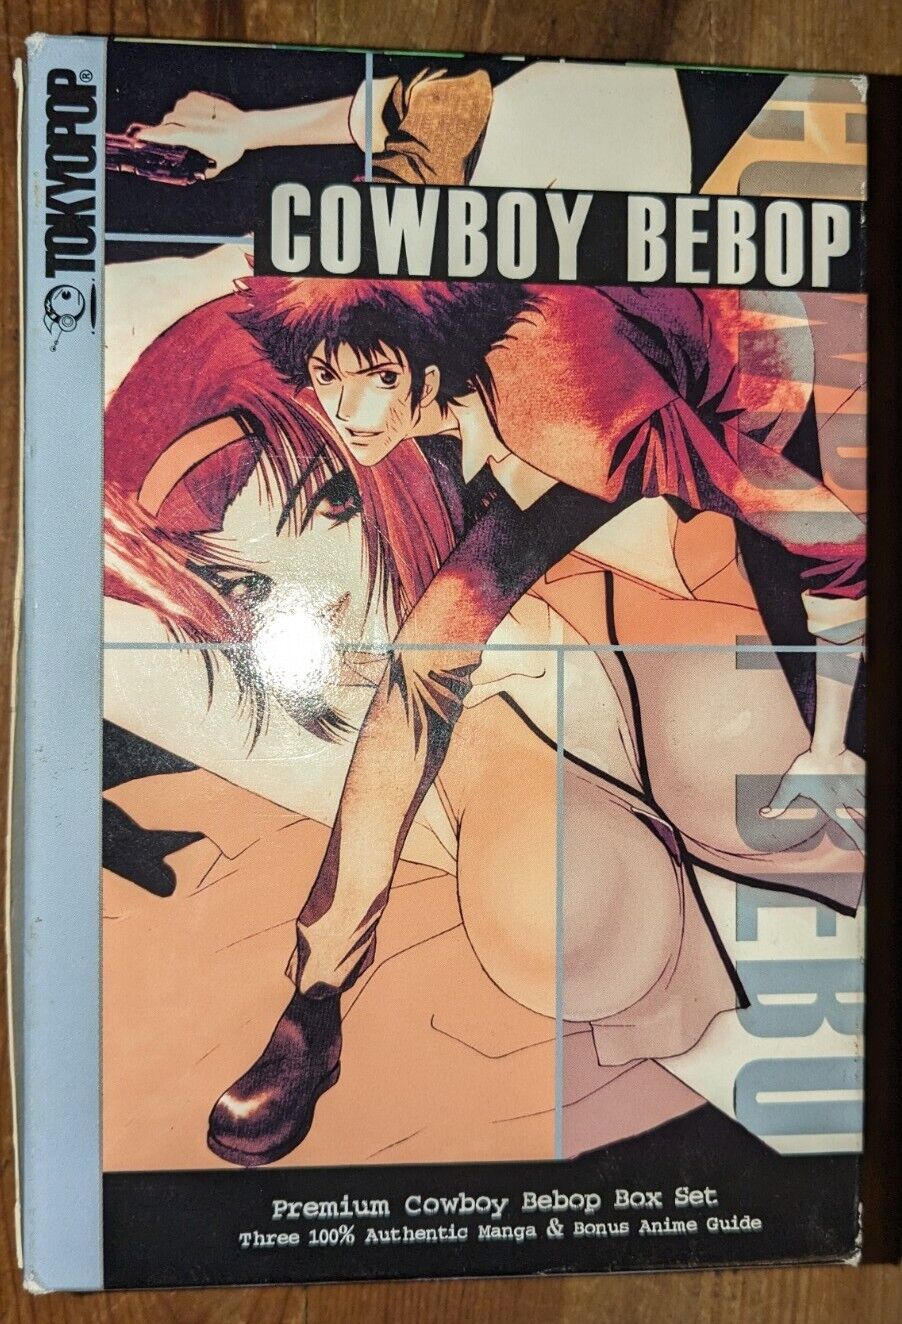 Cowboy Bebop The Complete Manga Collection Box Suncoast Video Edition